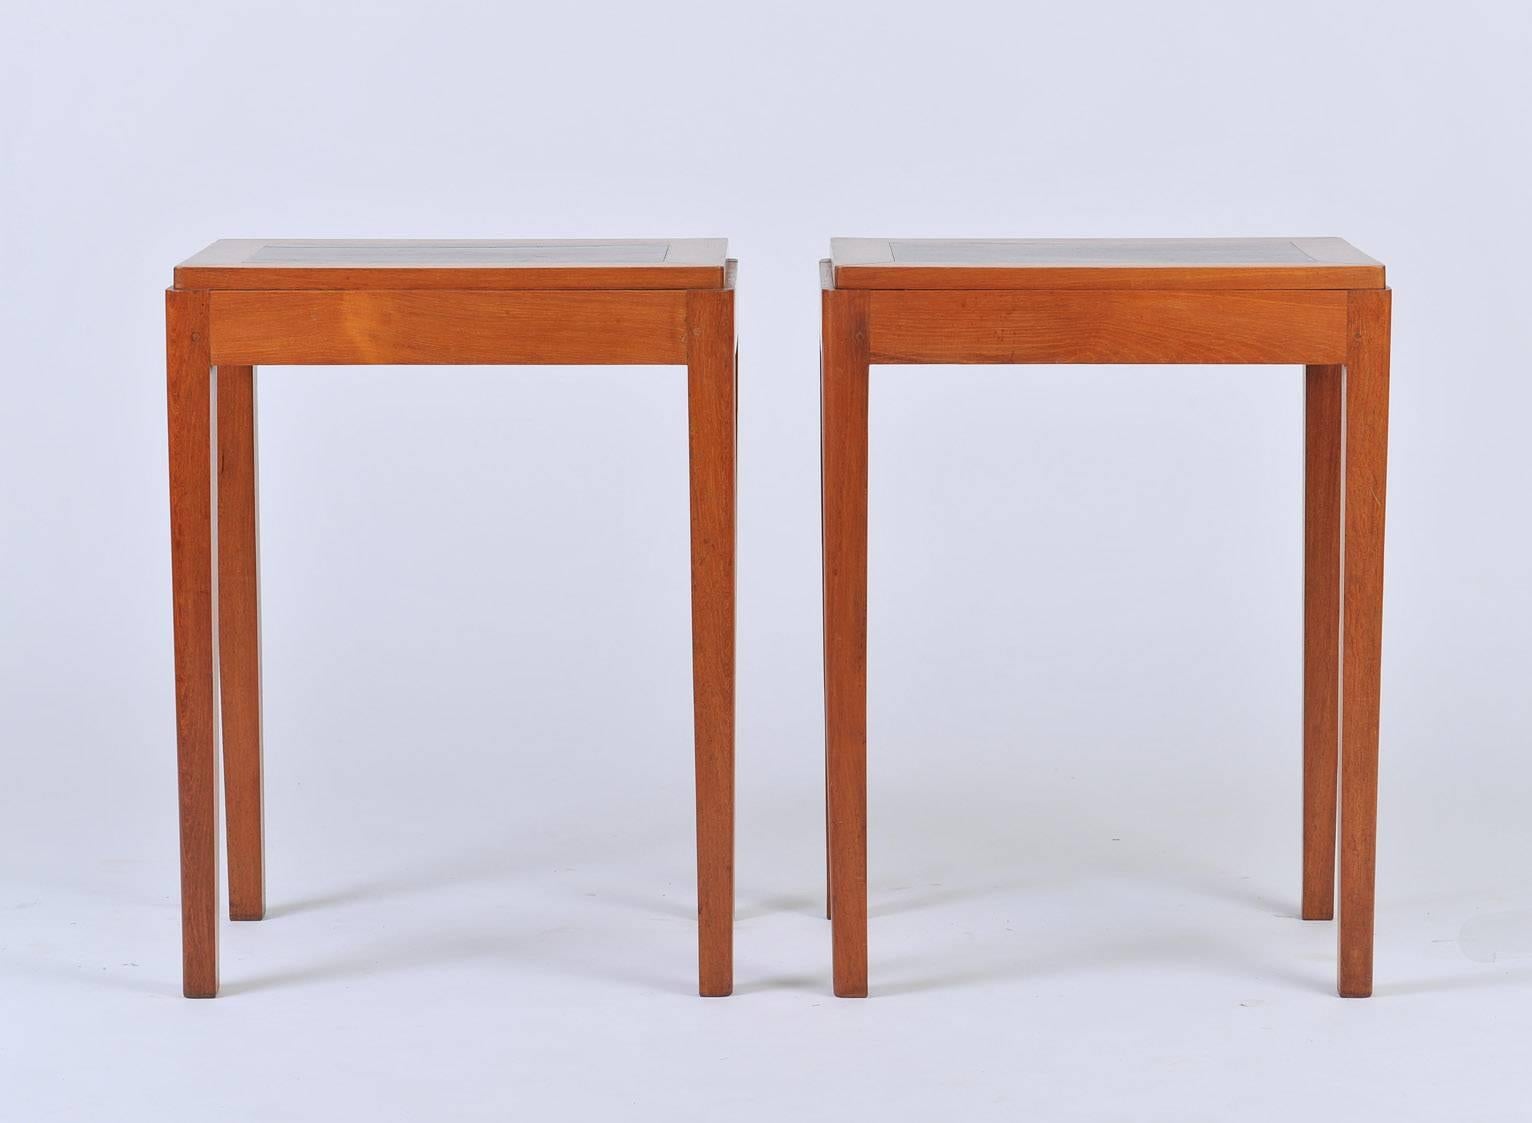 A pair of Art Deco teak and mahogany side tables, the two tome tops with stepped moldings and elegant rounded edges,
France, circa 1930.